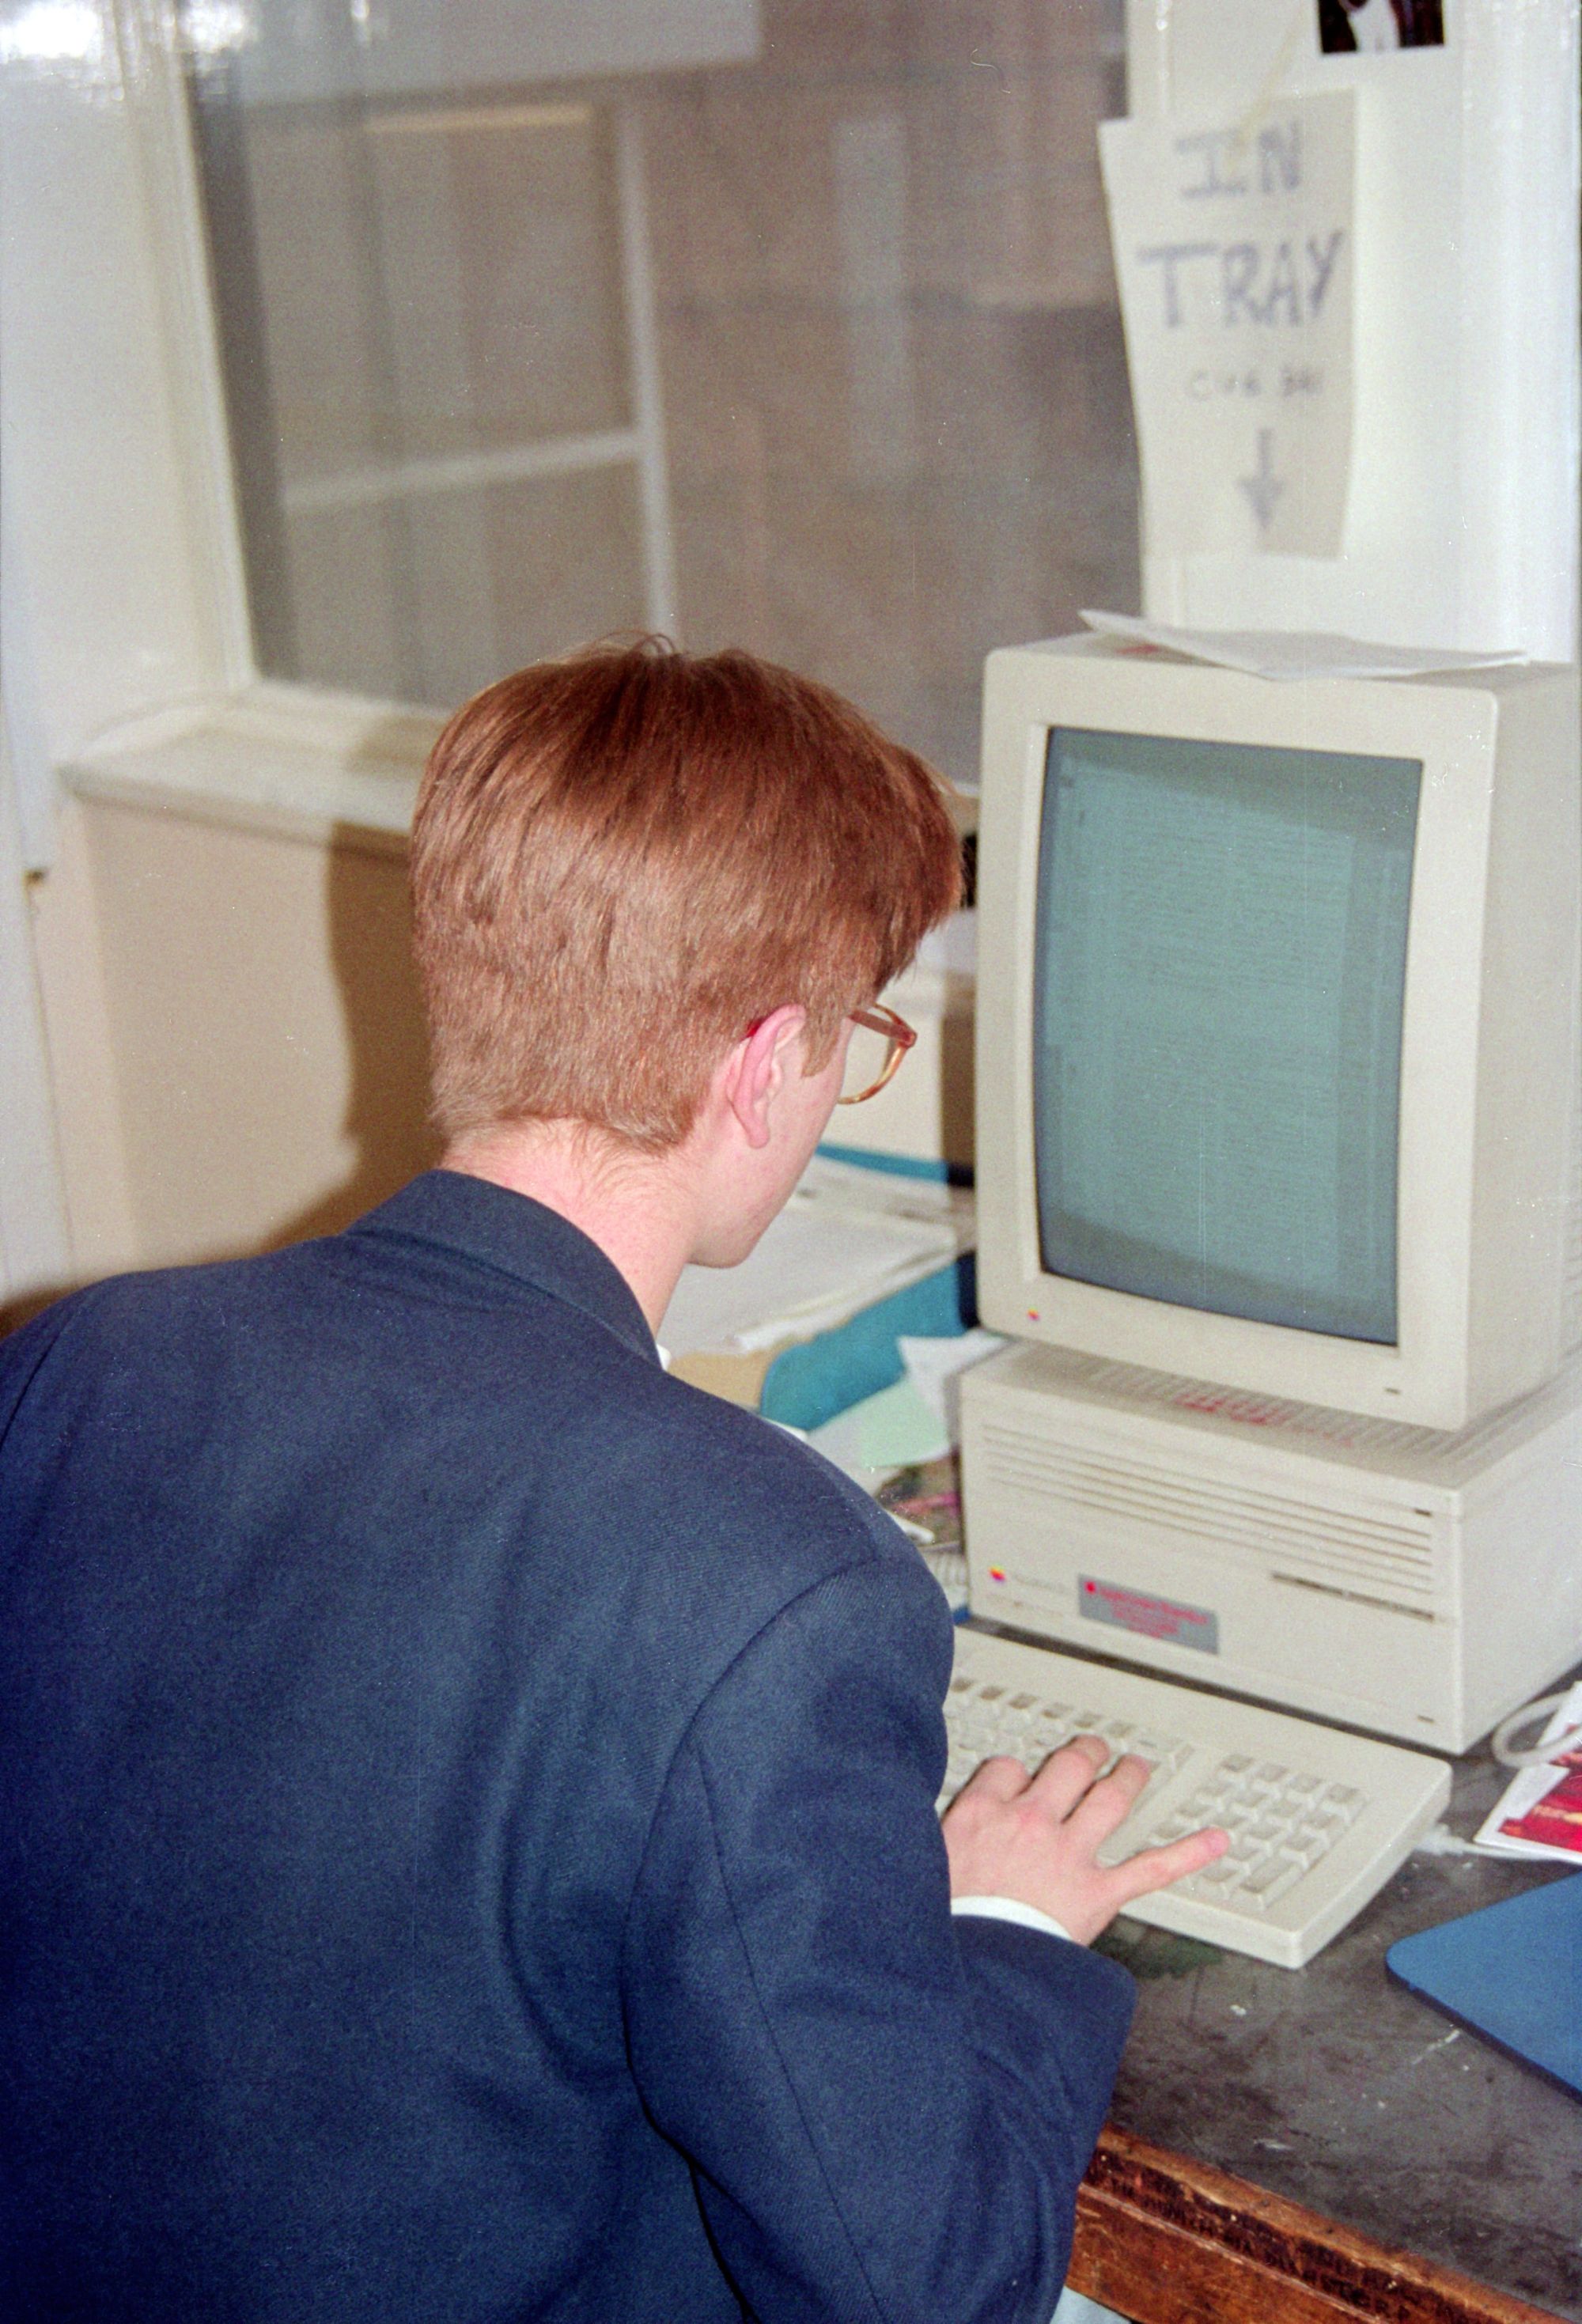 Paul Clements working in the Cub office in 1994